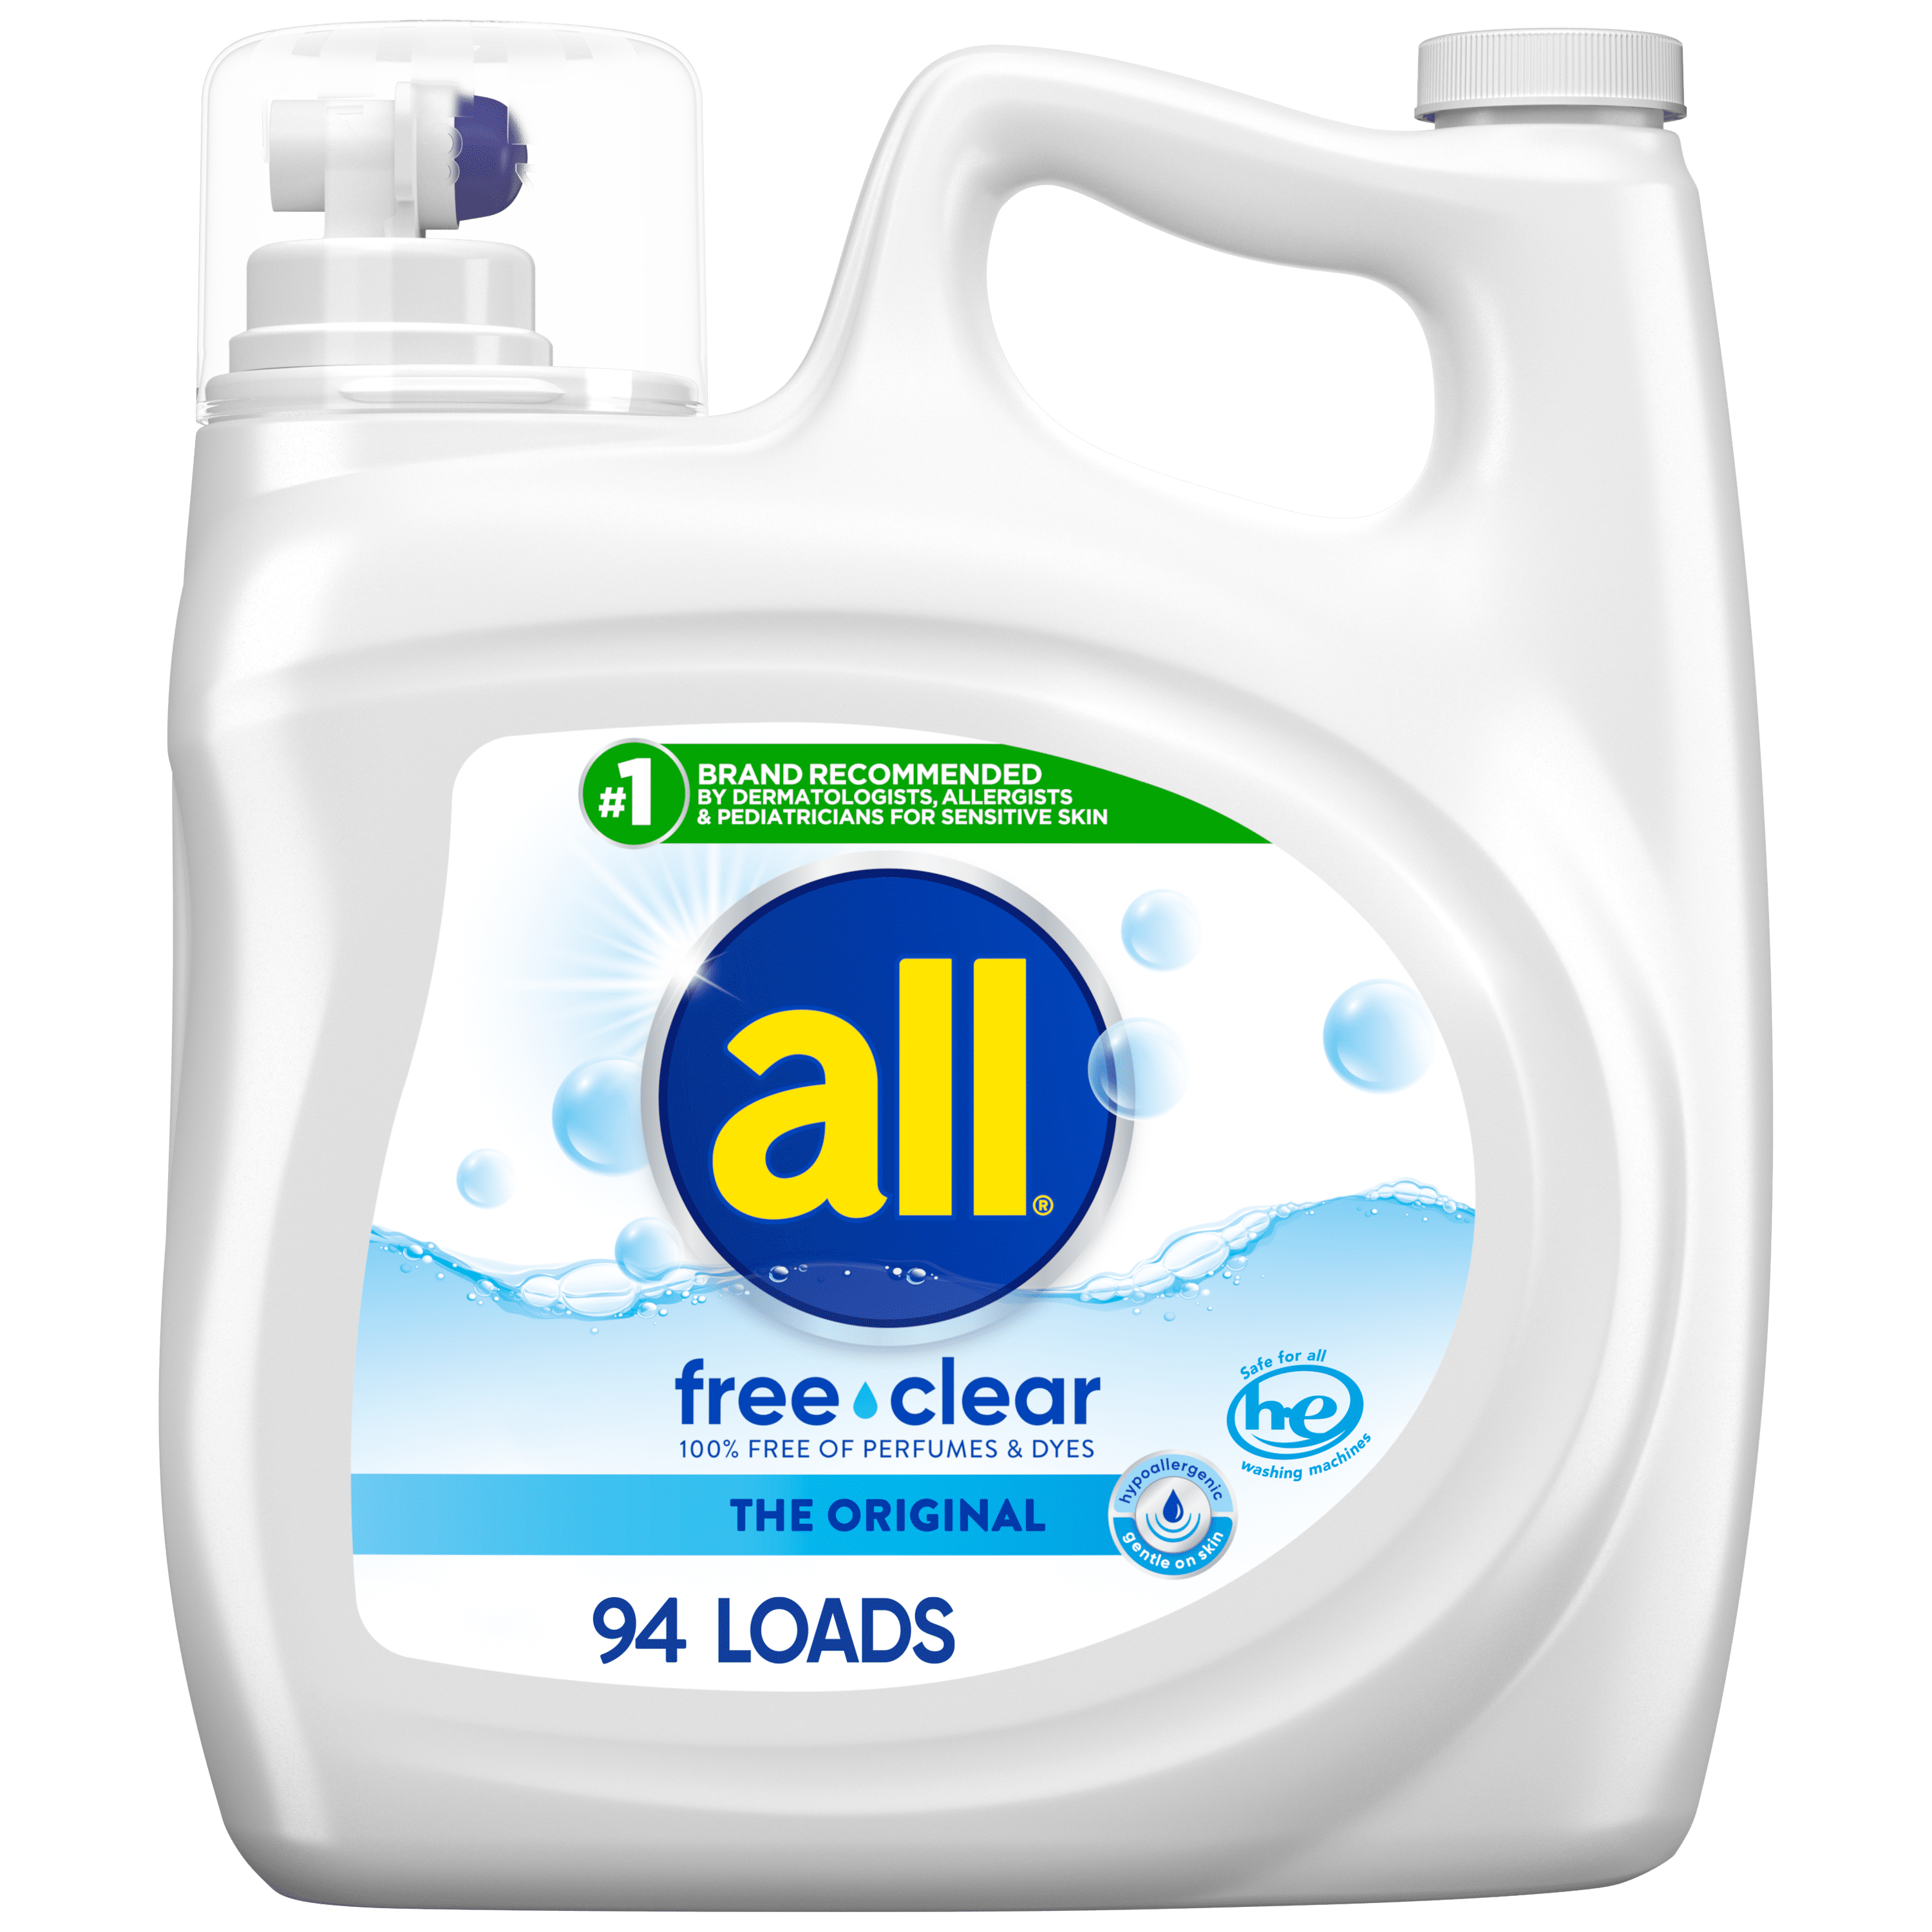 all Liquid Laundry Detergent Free Clear for Sensitive Skin, 141 Ounce, 94 Loads